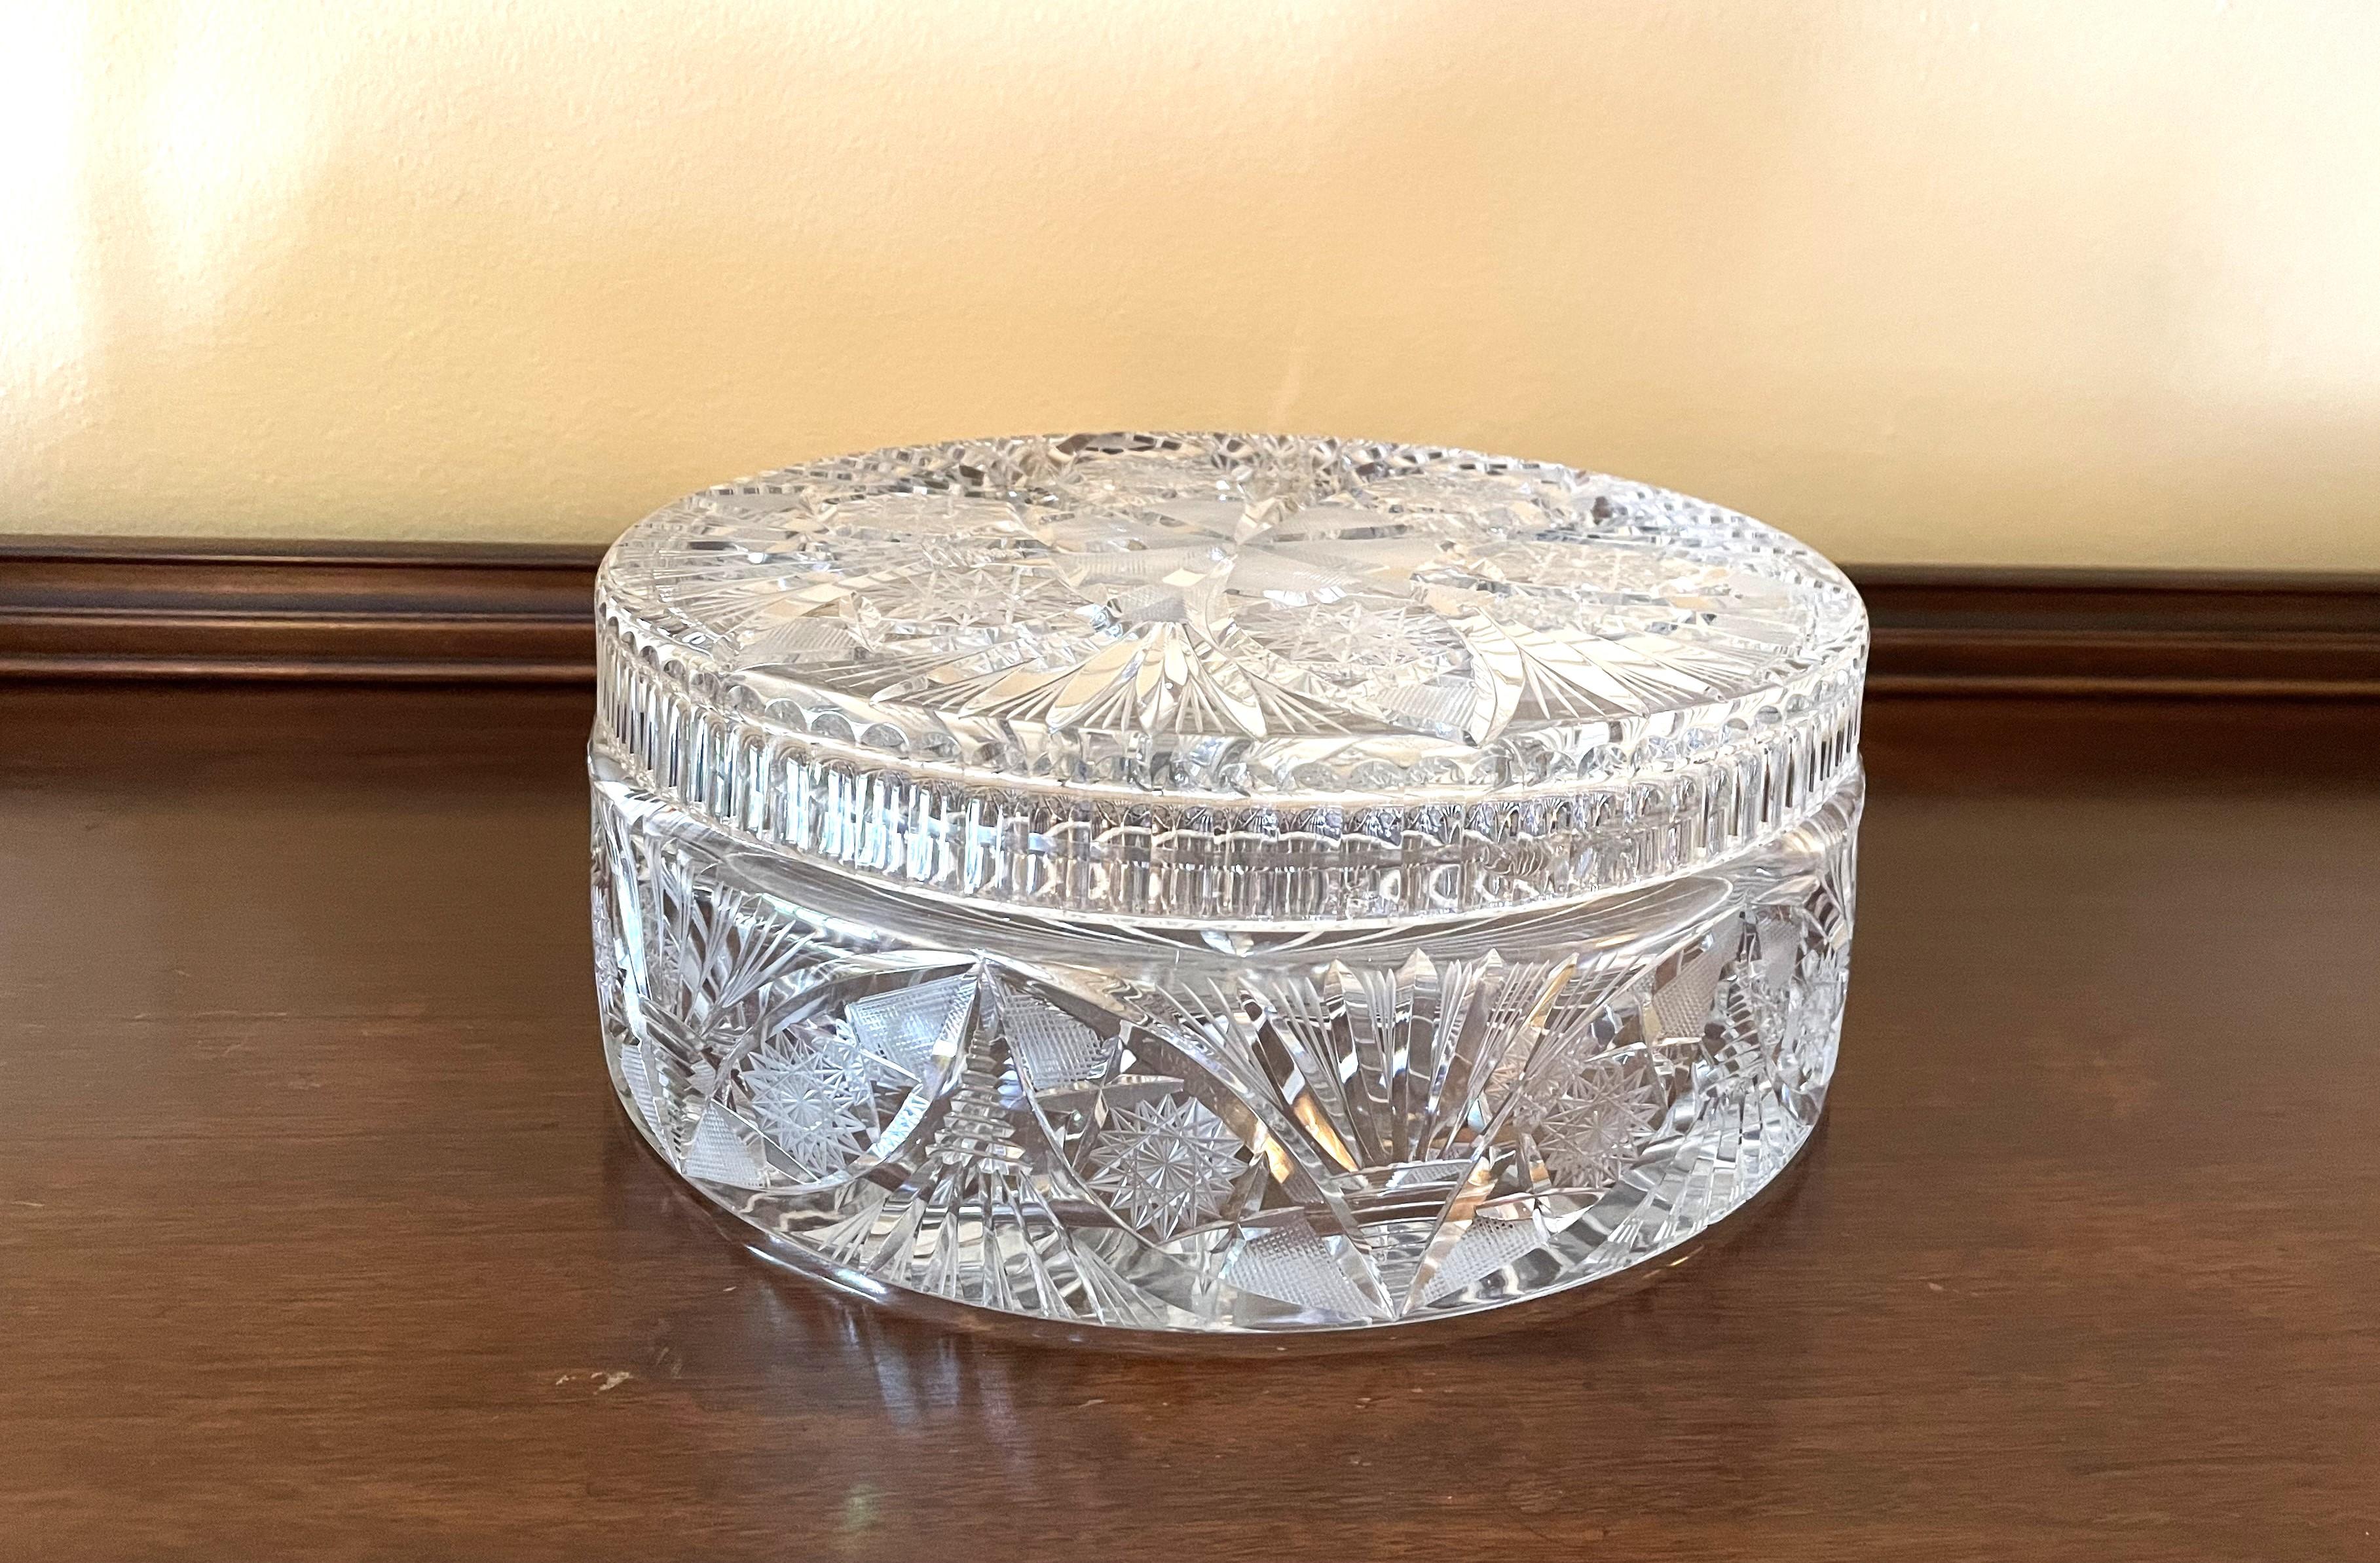 A stunning and large Mid-Century Waterford decorative leaded crystal piece for dining table, hall or coffee table. The container has a matching leaded crystal lid. This is a rare-to-find piece for its size and style from the late 1950s, made in